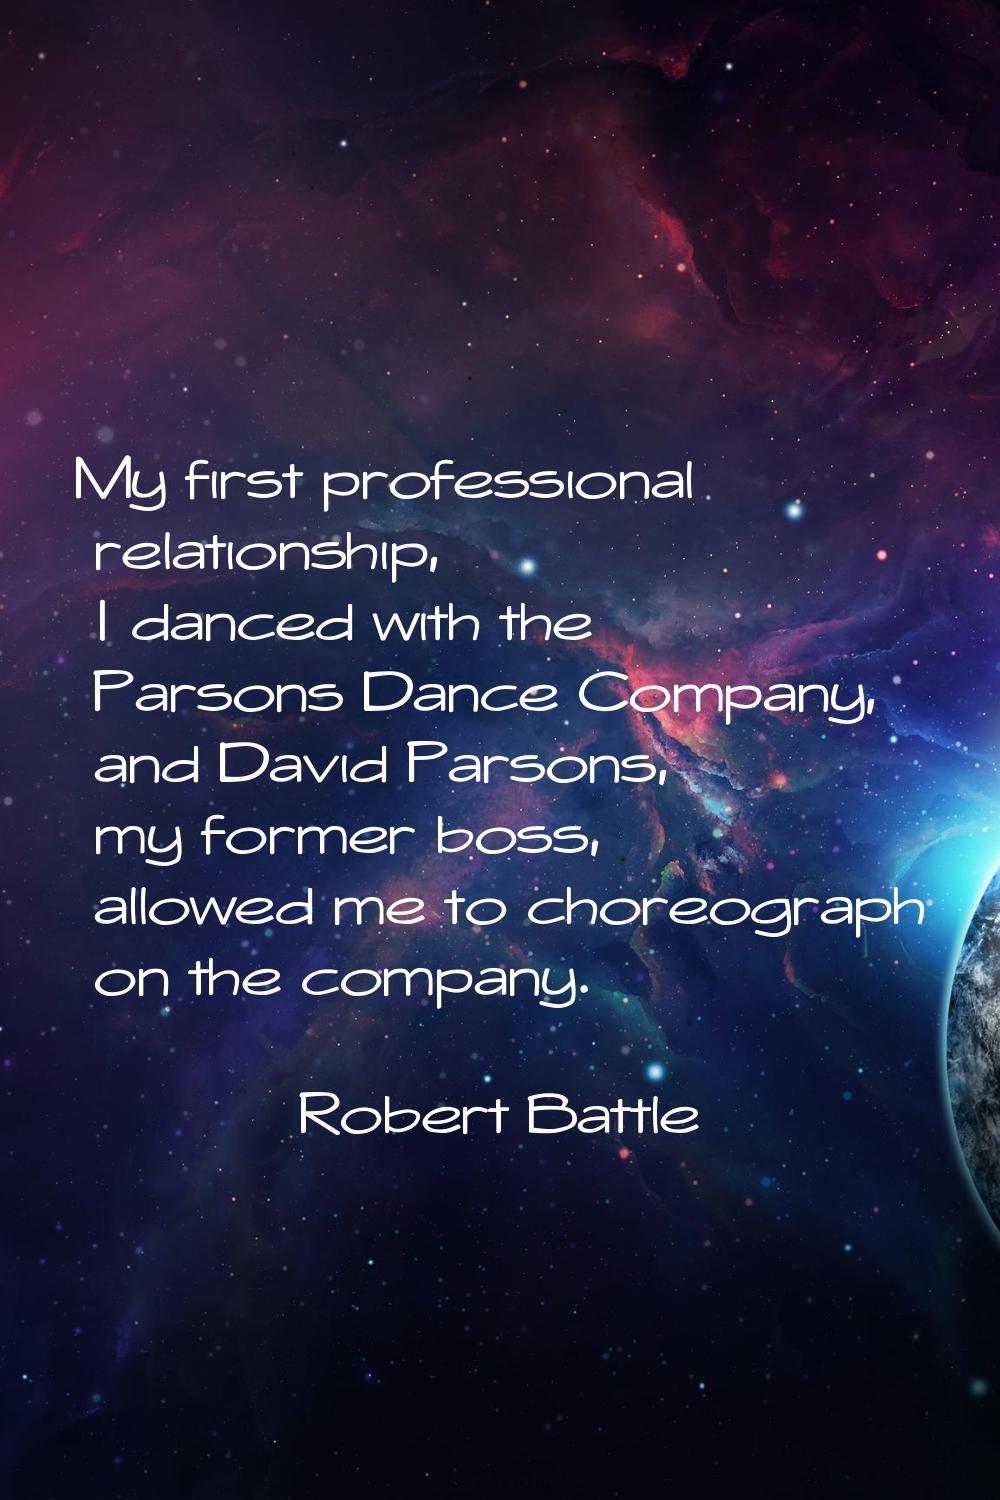 My first professional relationship, I danced with the Parsons Dance Company, and David Parsons, my 